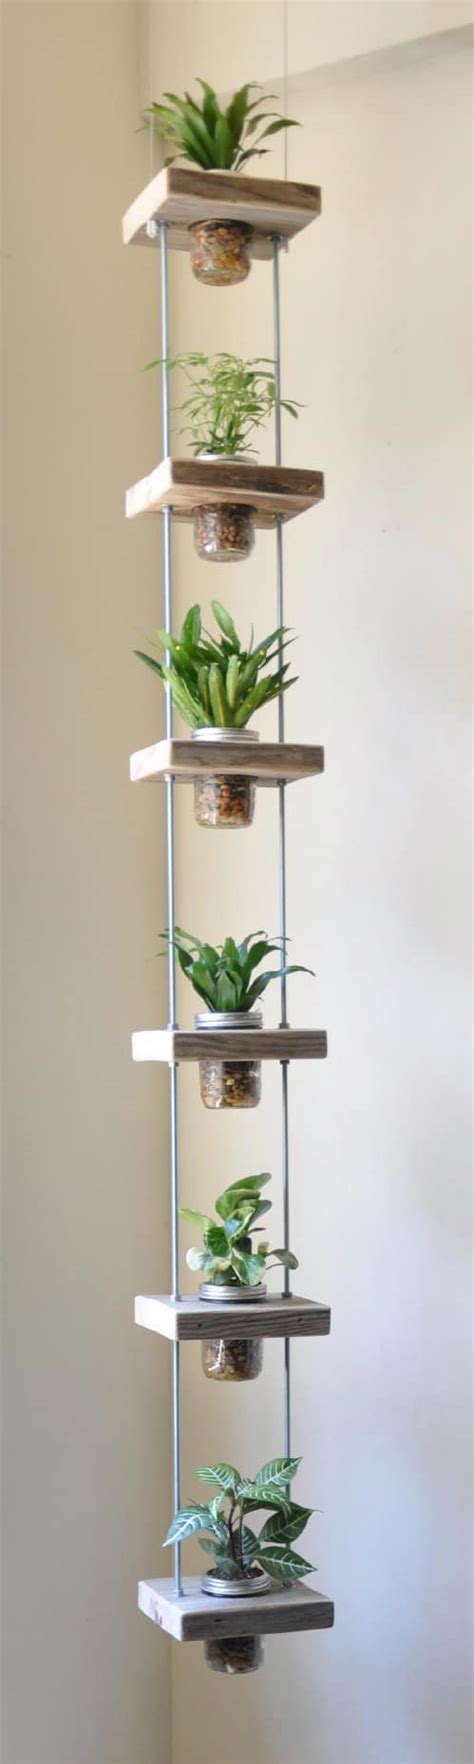 18 Brilliant And Creative Diy Herb Gardens For Indoors And